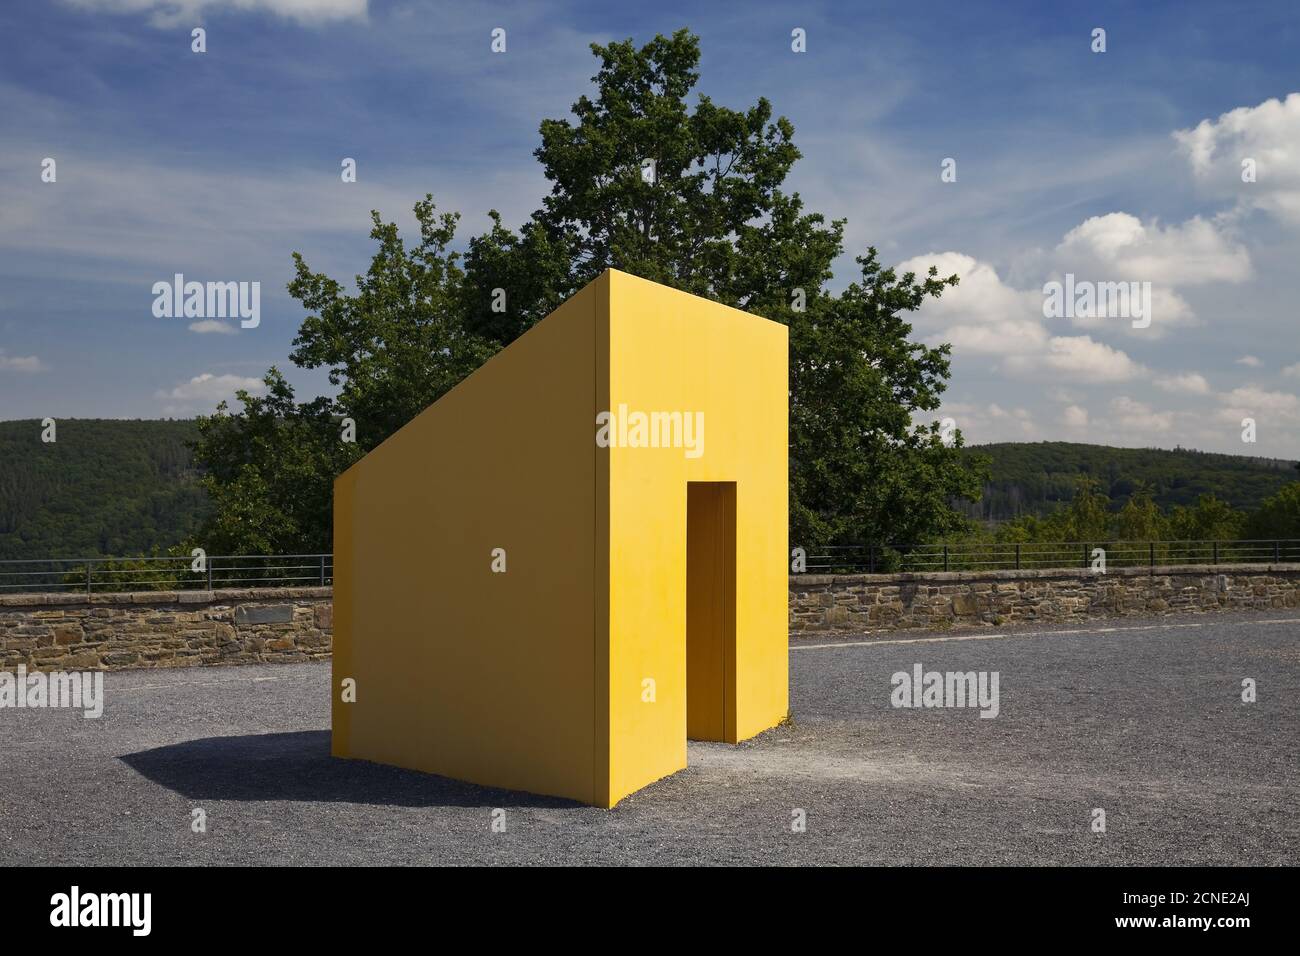 Former NS-Ordensburg Vogelsang with yellow sculpture, today Vogelsang ip, Schleiden, Germany, Europe Stock Photo